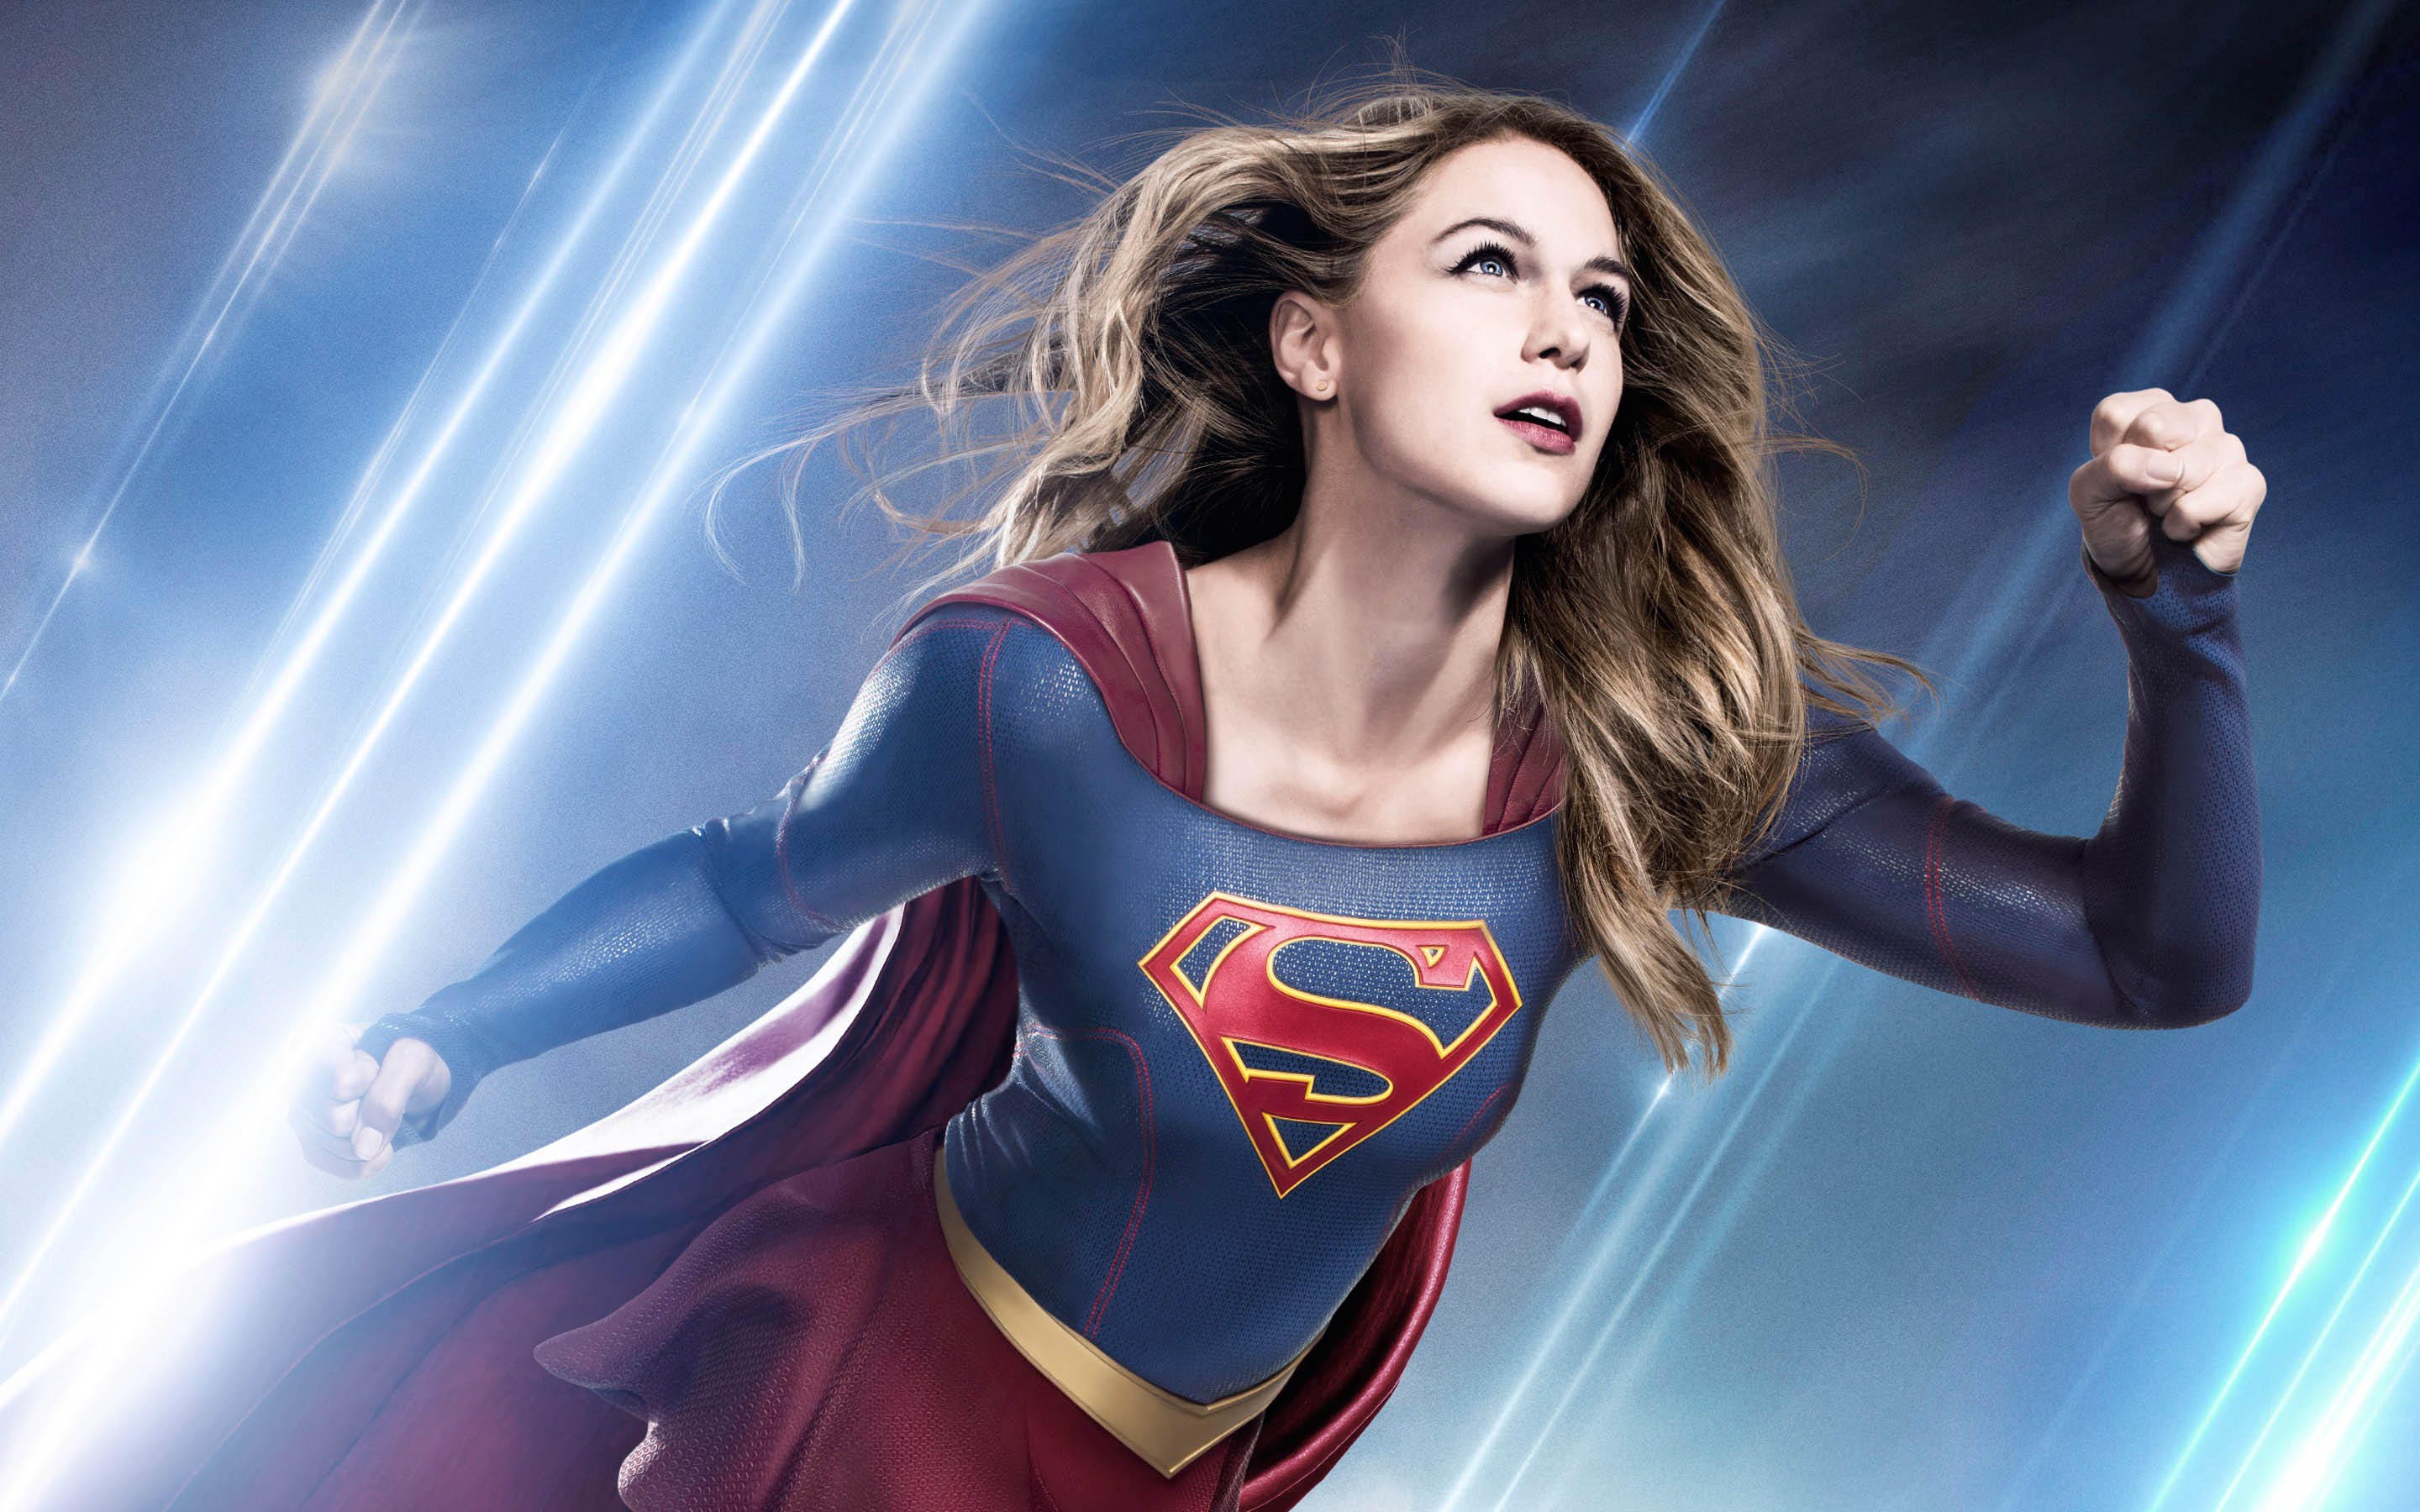 Supergirl to end after six seasons on The CW - CNET